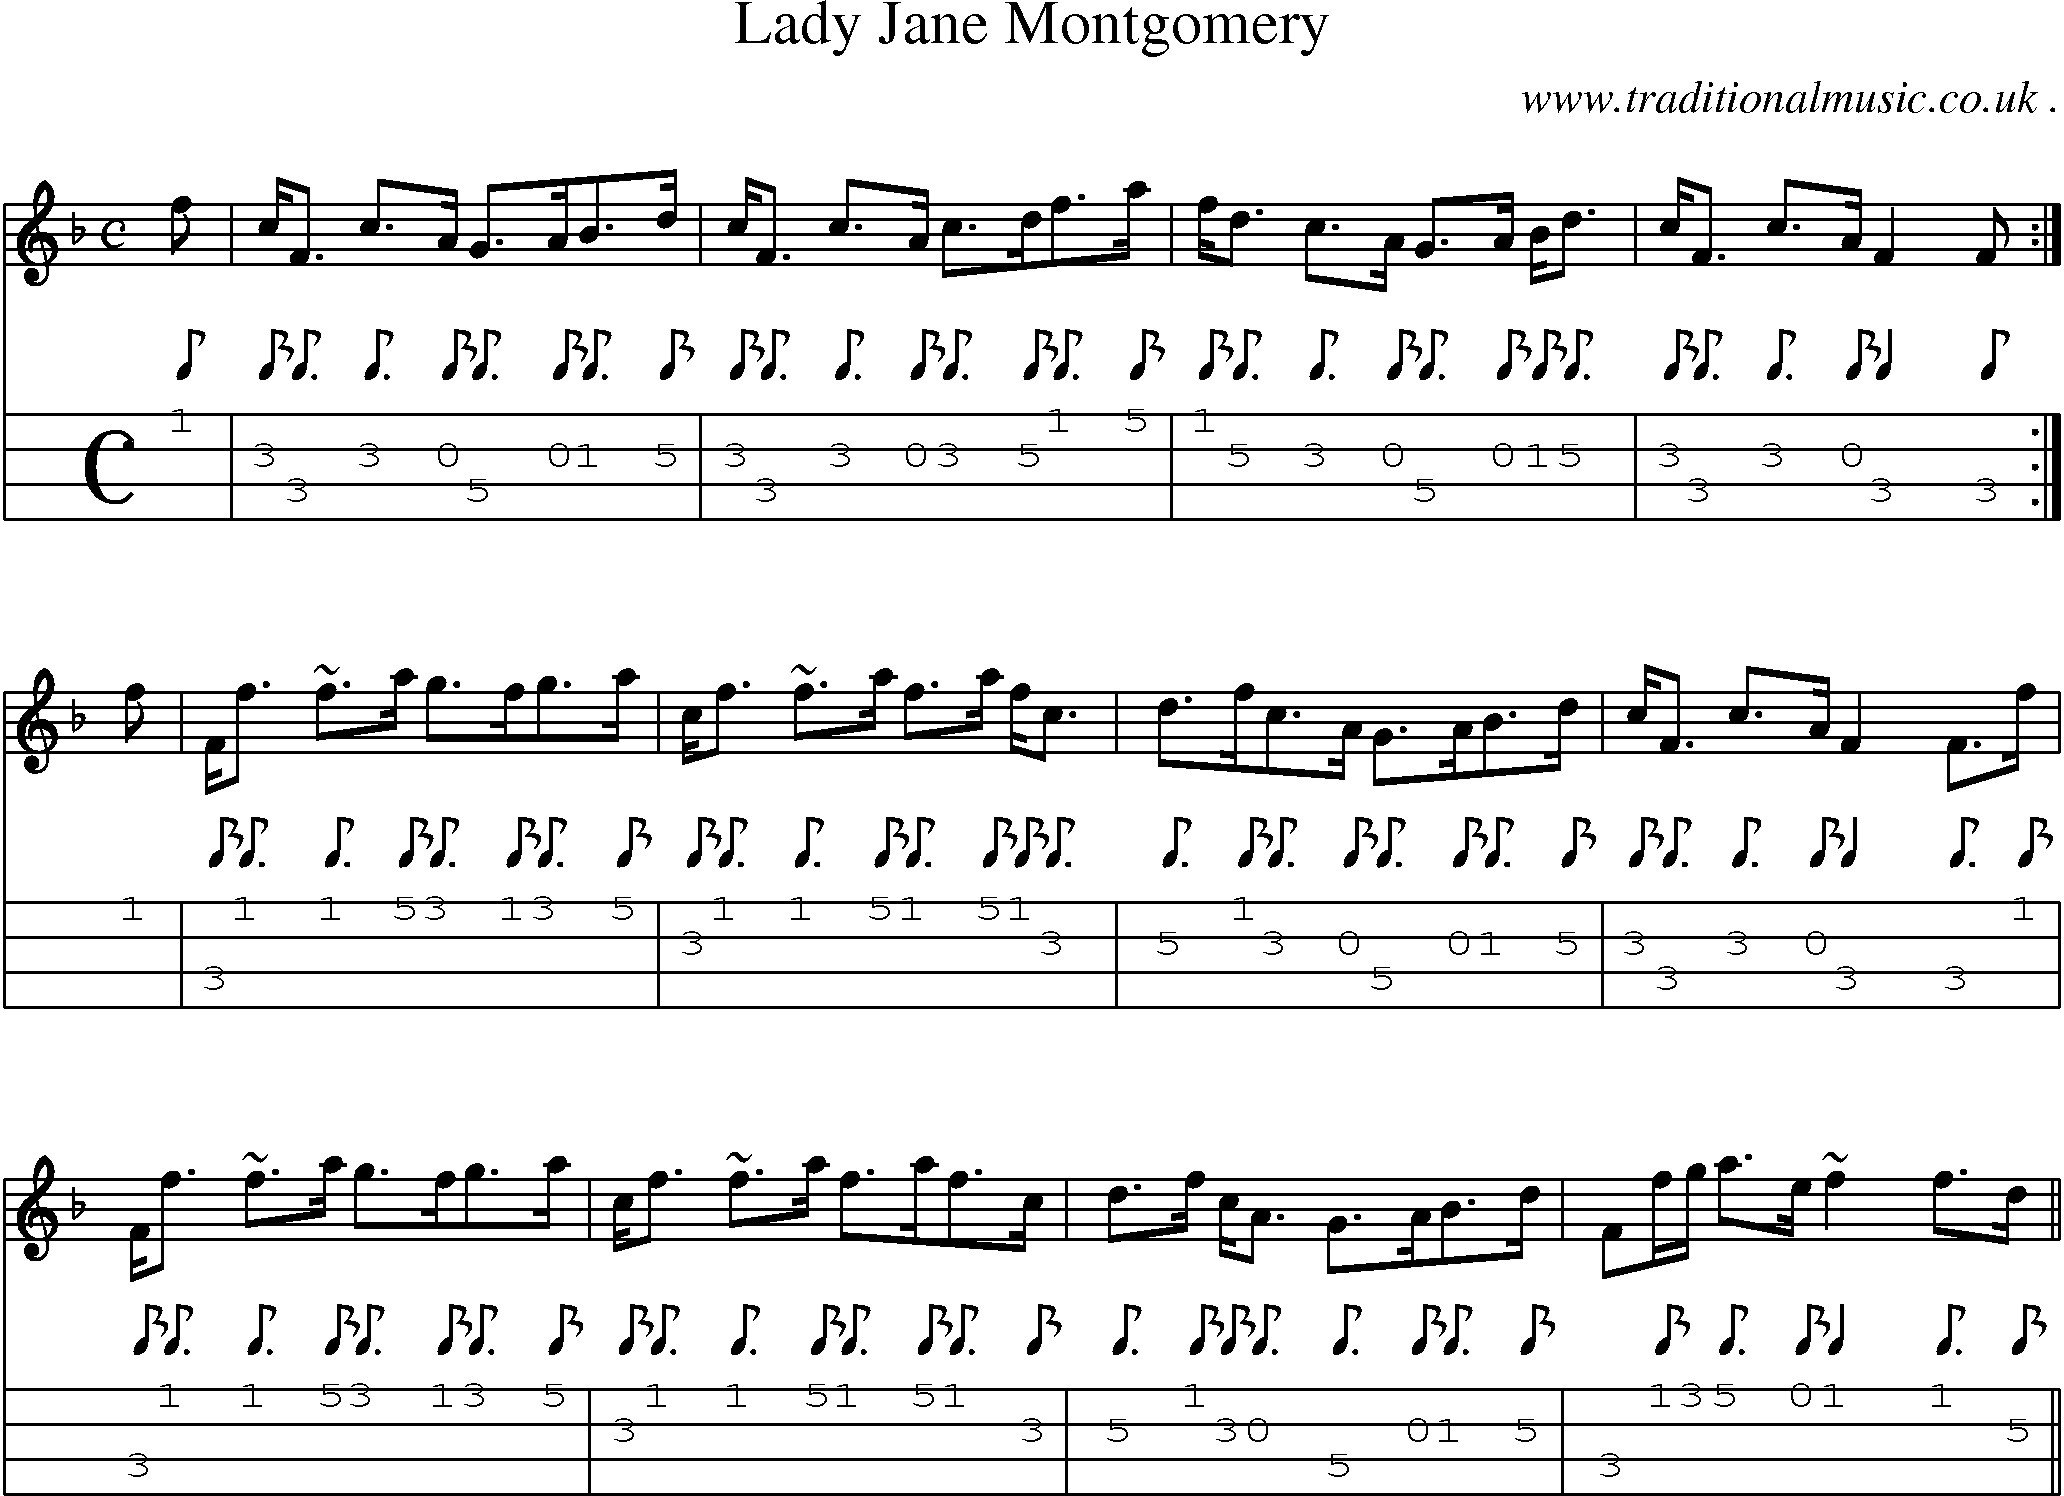 Sheet-music  score, Chords and Mandolin Tabs for Lady Jane Montgomery